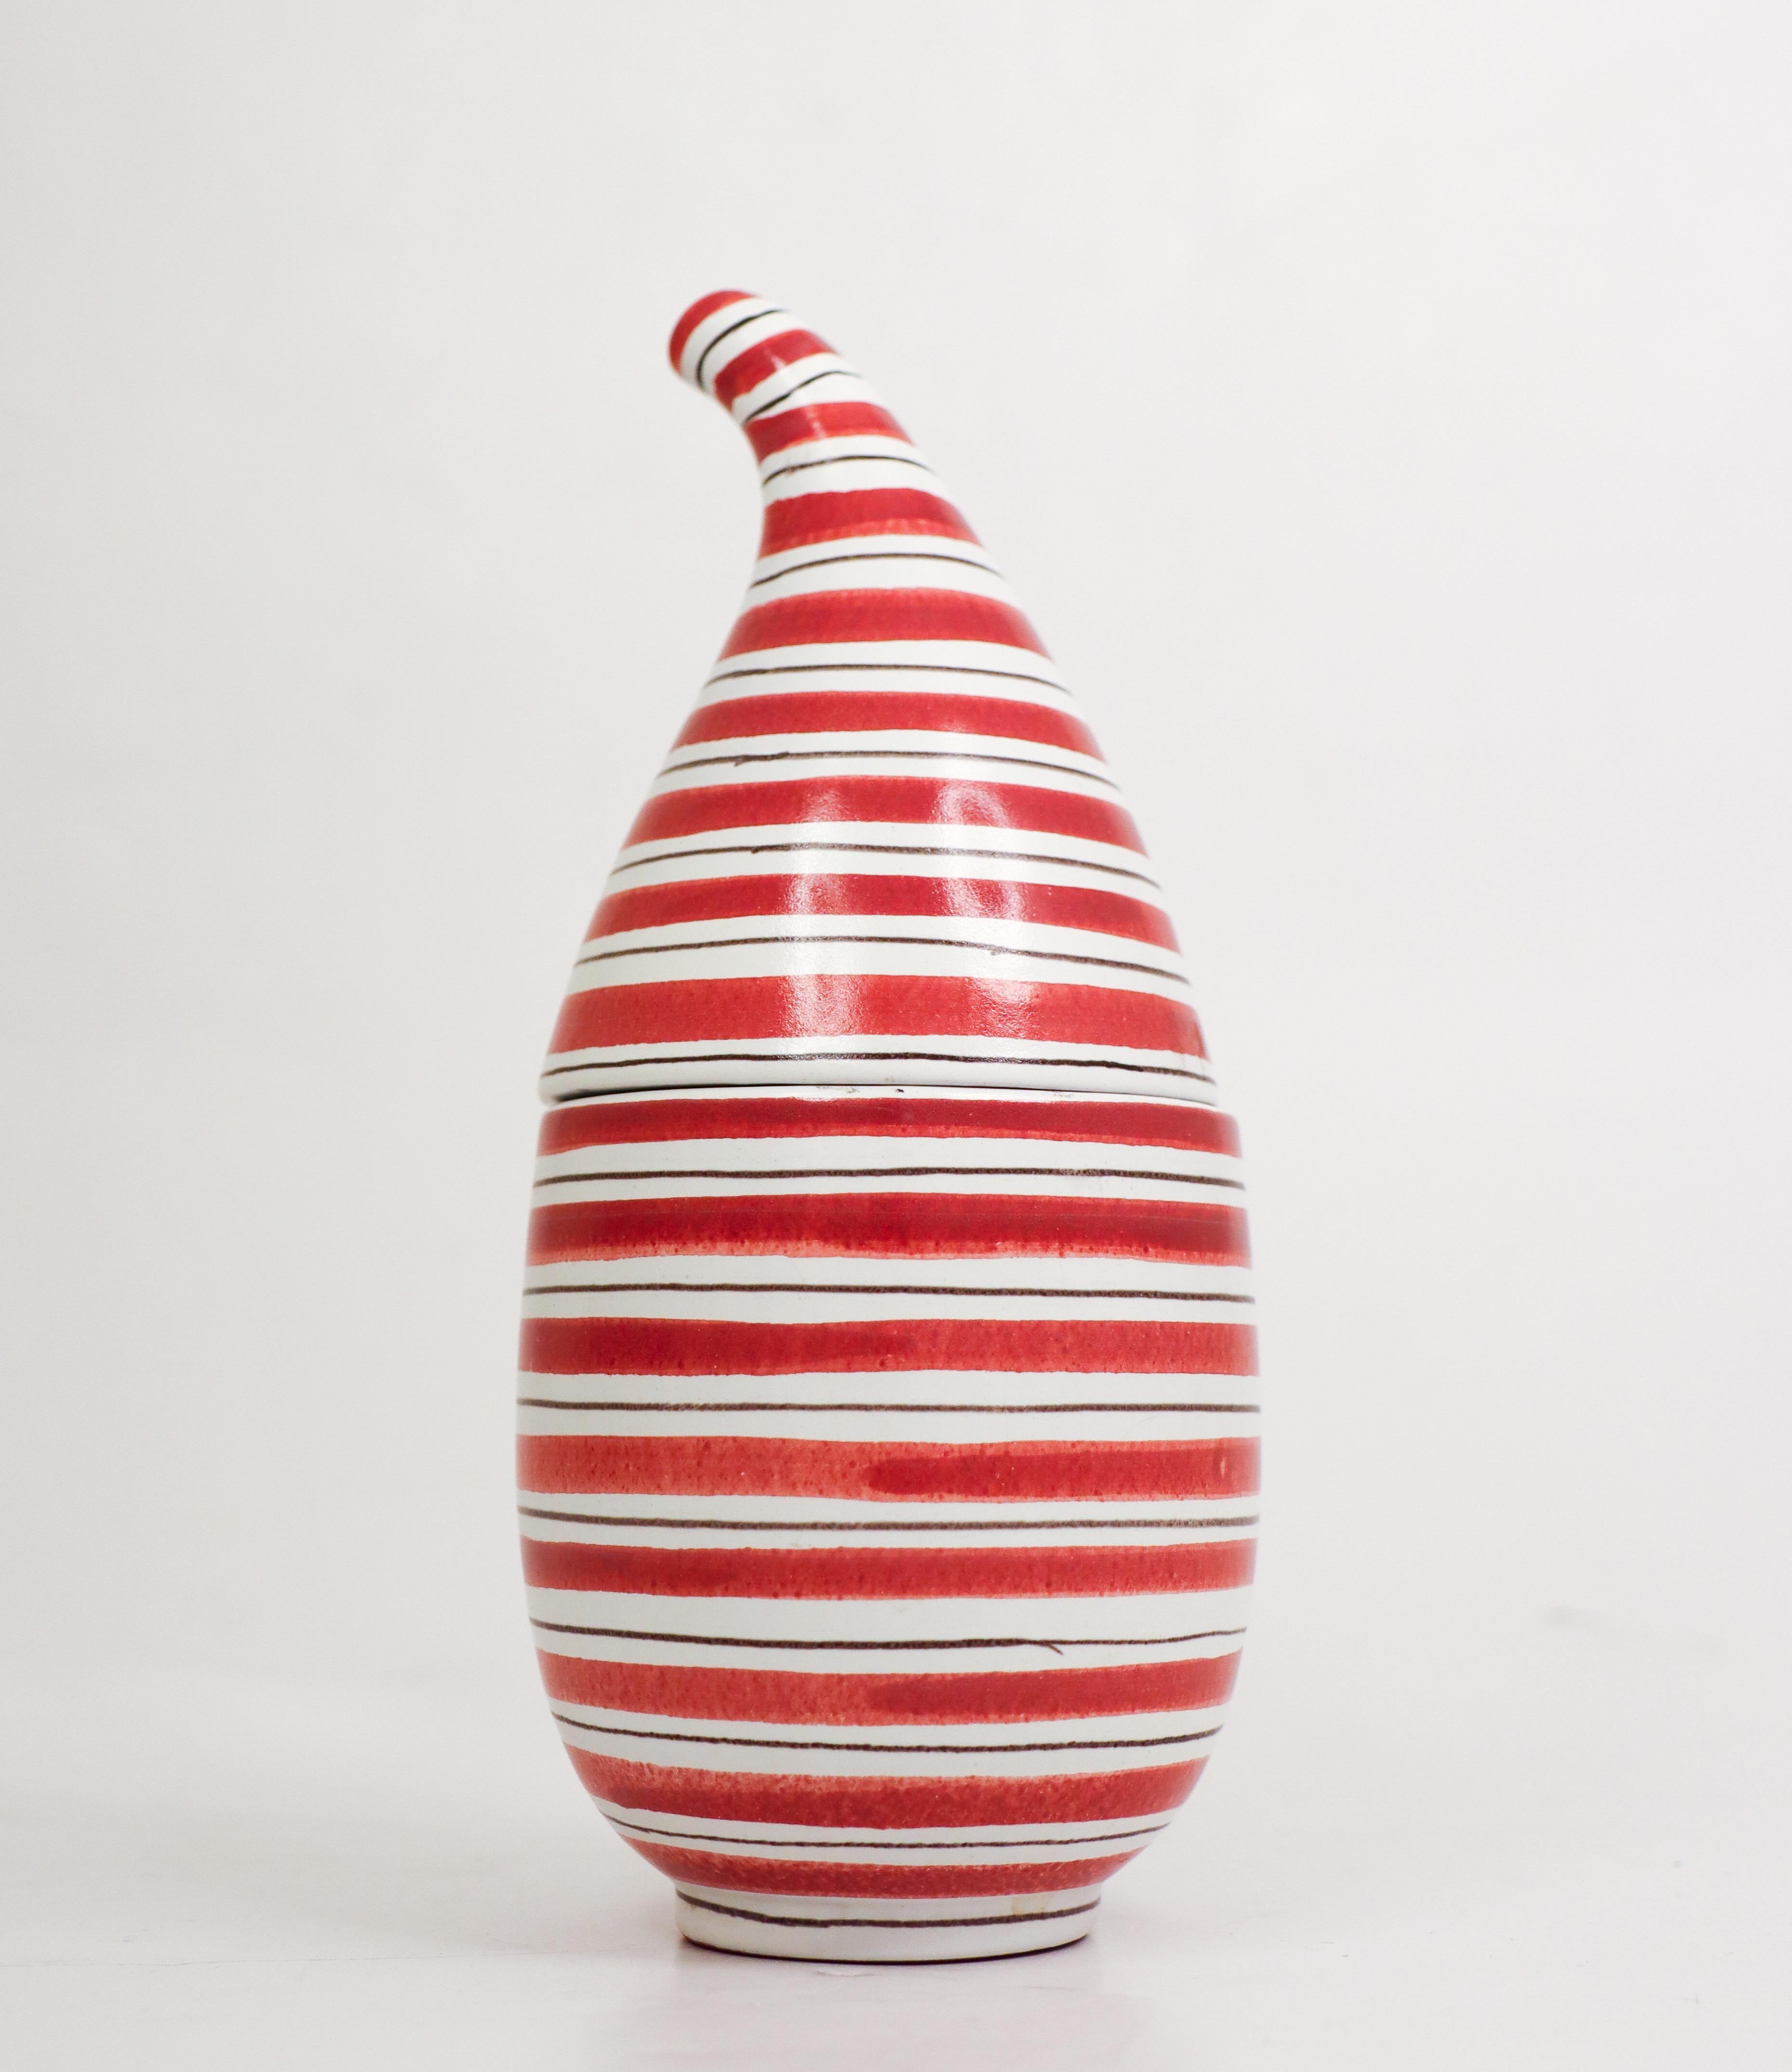 Rare Faience Lidded Bowl Red & White striped Stig Lindberg - Gustavsberg 1950s In Excellent Condition For Sale In Stockholm, SE